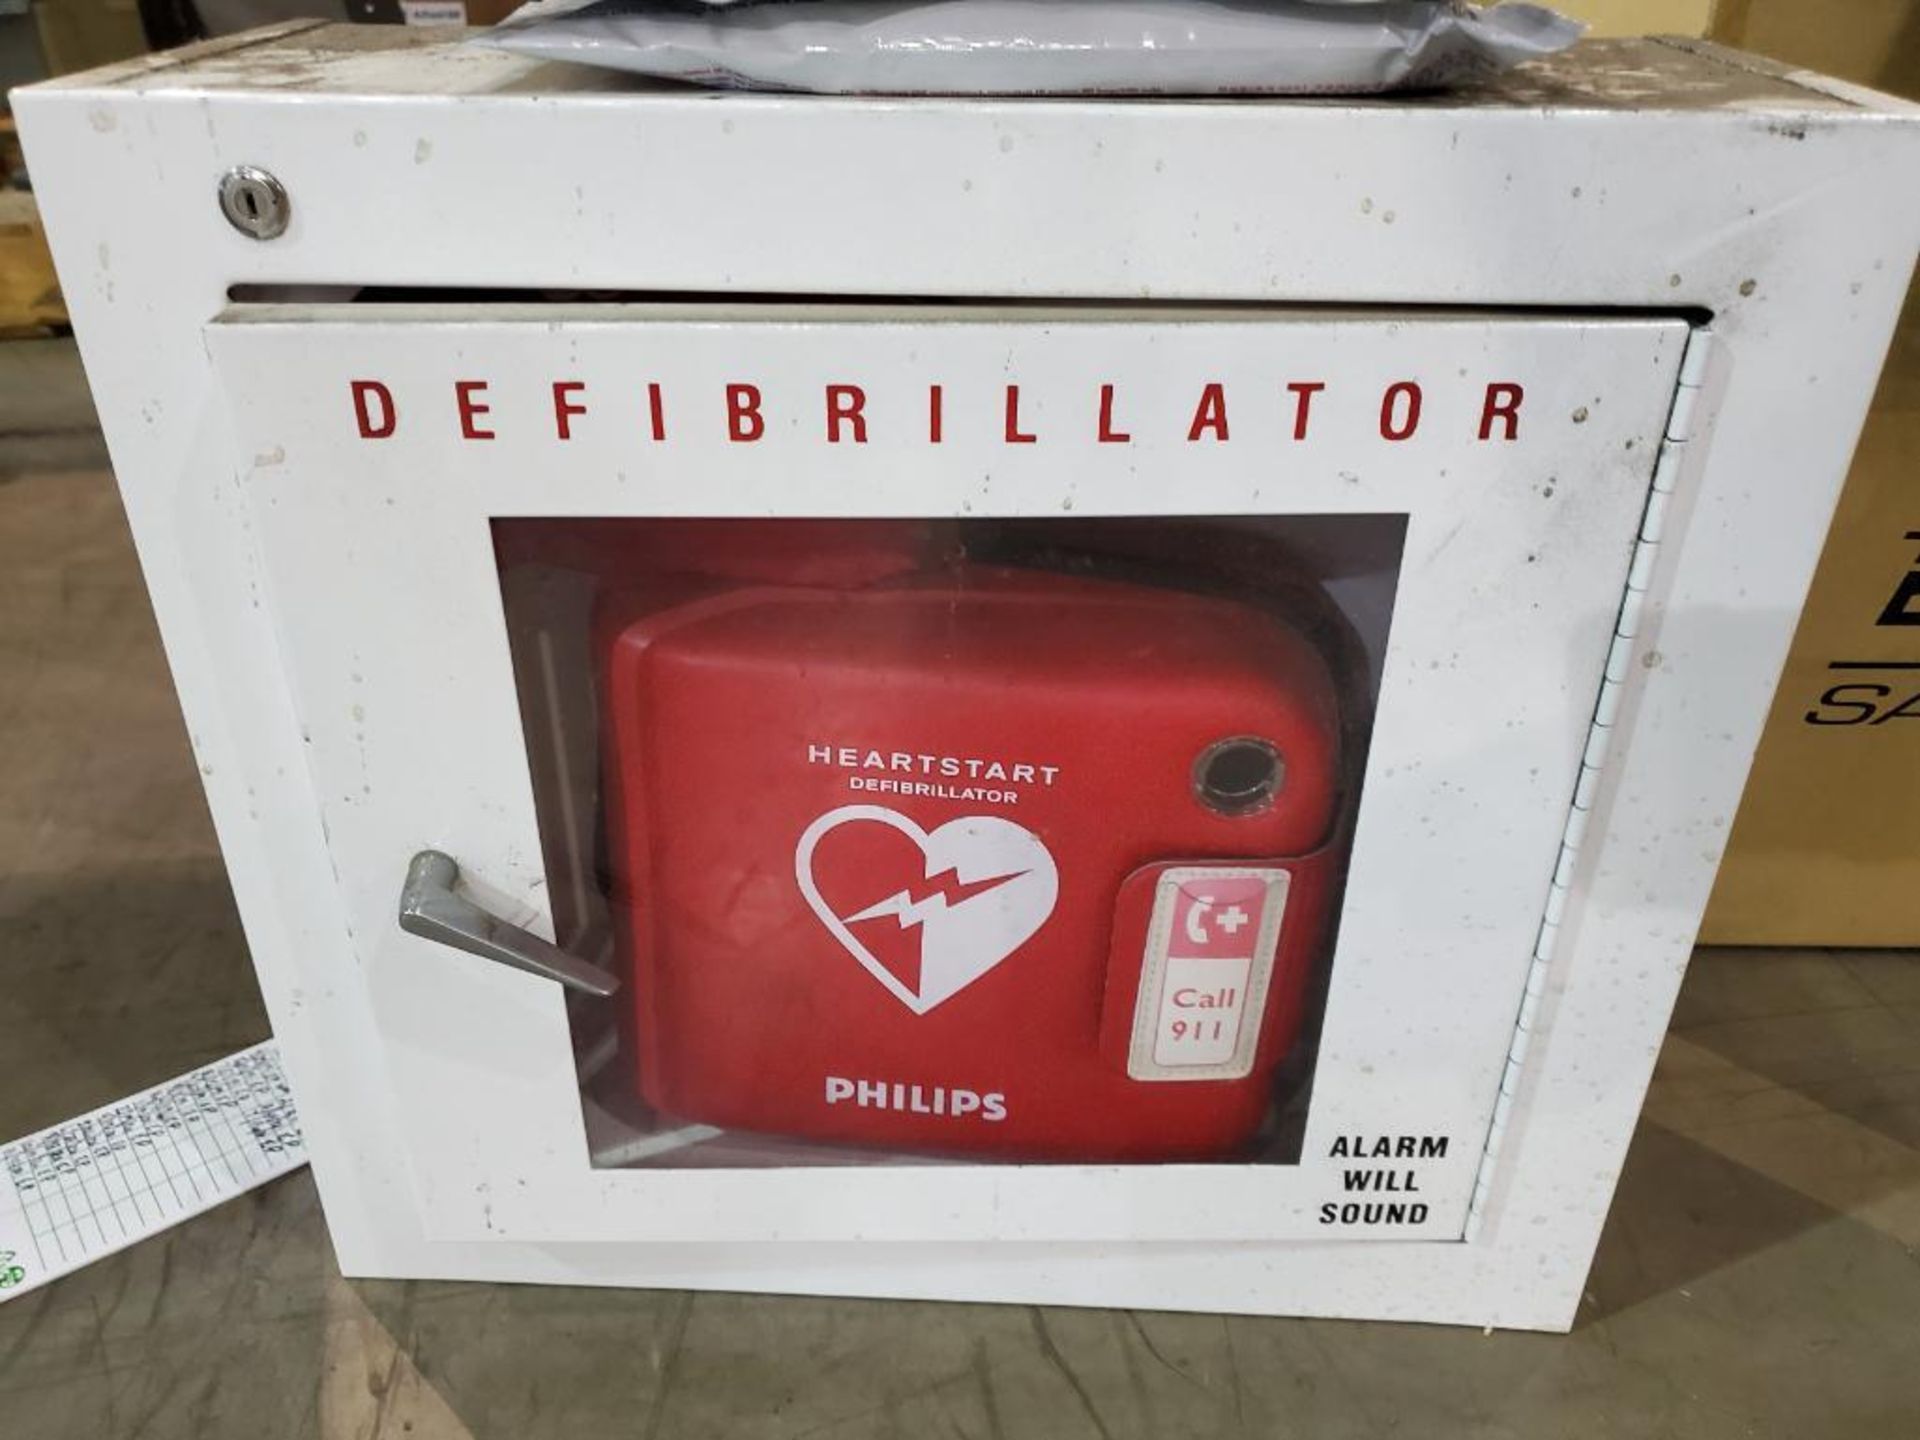 PALLET OF (2) DEFIBRILLATORS, SAFETY GLASS, GLOVES, HARD HATS W/ SHIELDS, & MORE - Image 3 of 8